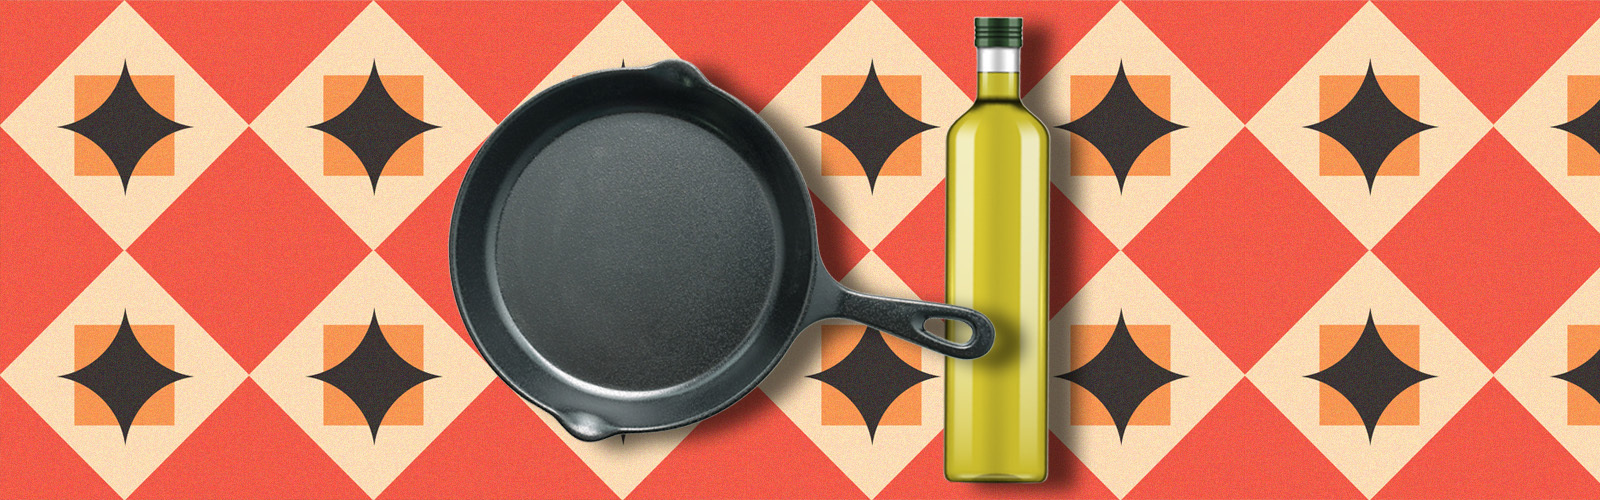 Here's the Best Cookware & When to Use It